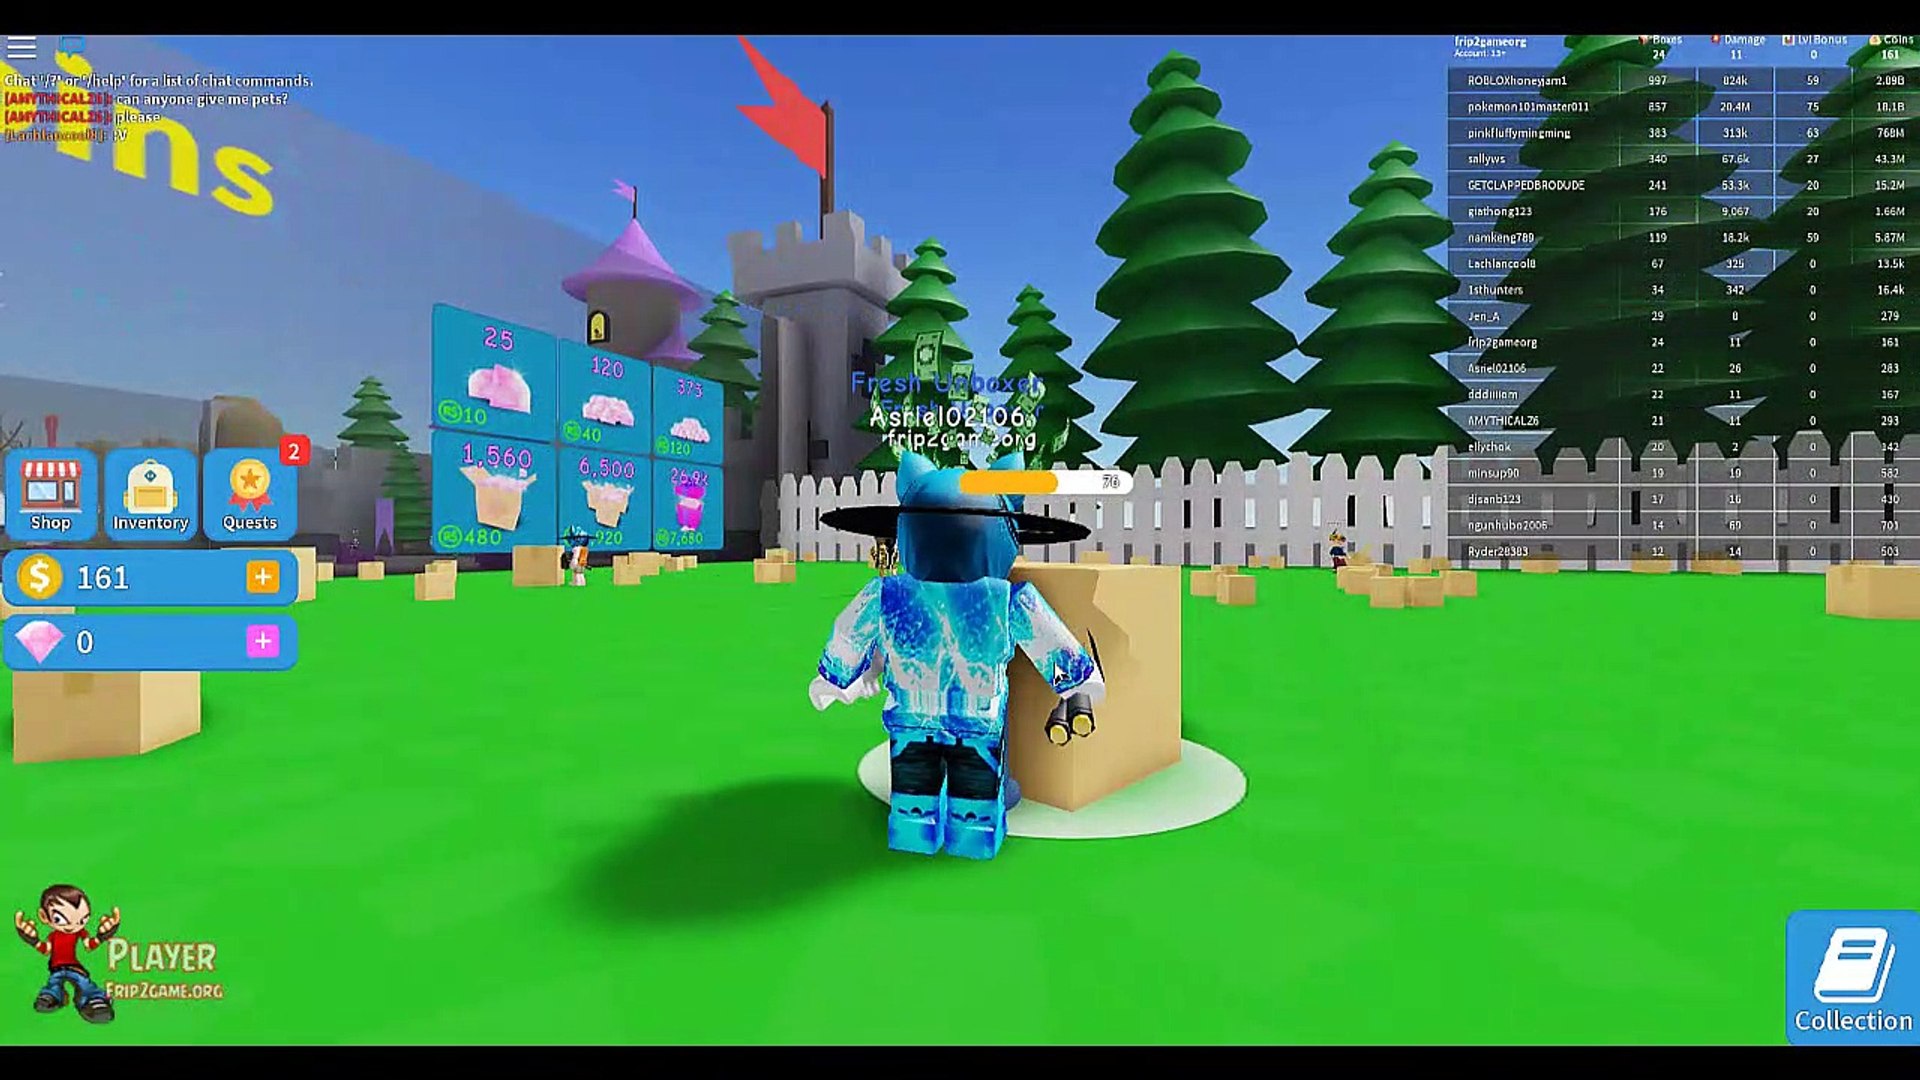 Video Unboxing Simulator New Game Of Roblox Video Dailymotion - unboxing roblox toys roblox season 3 5 toy unboxing